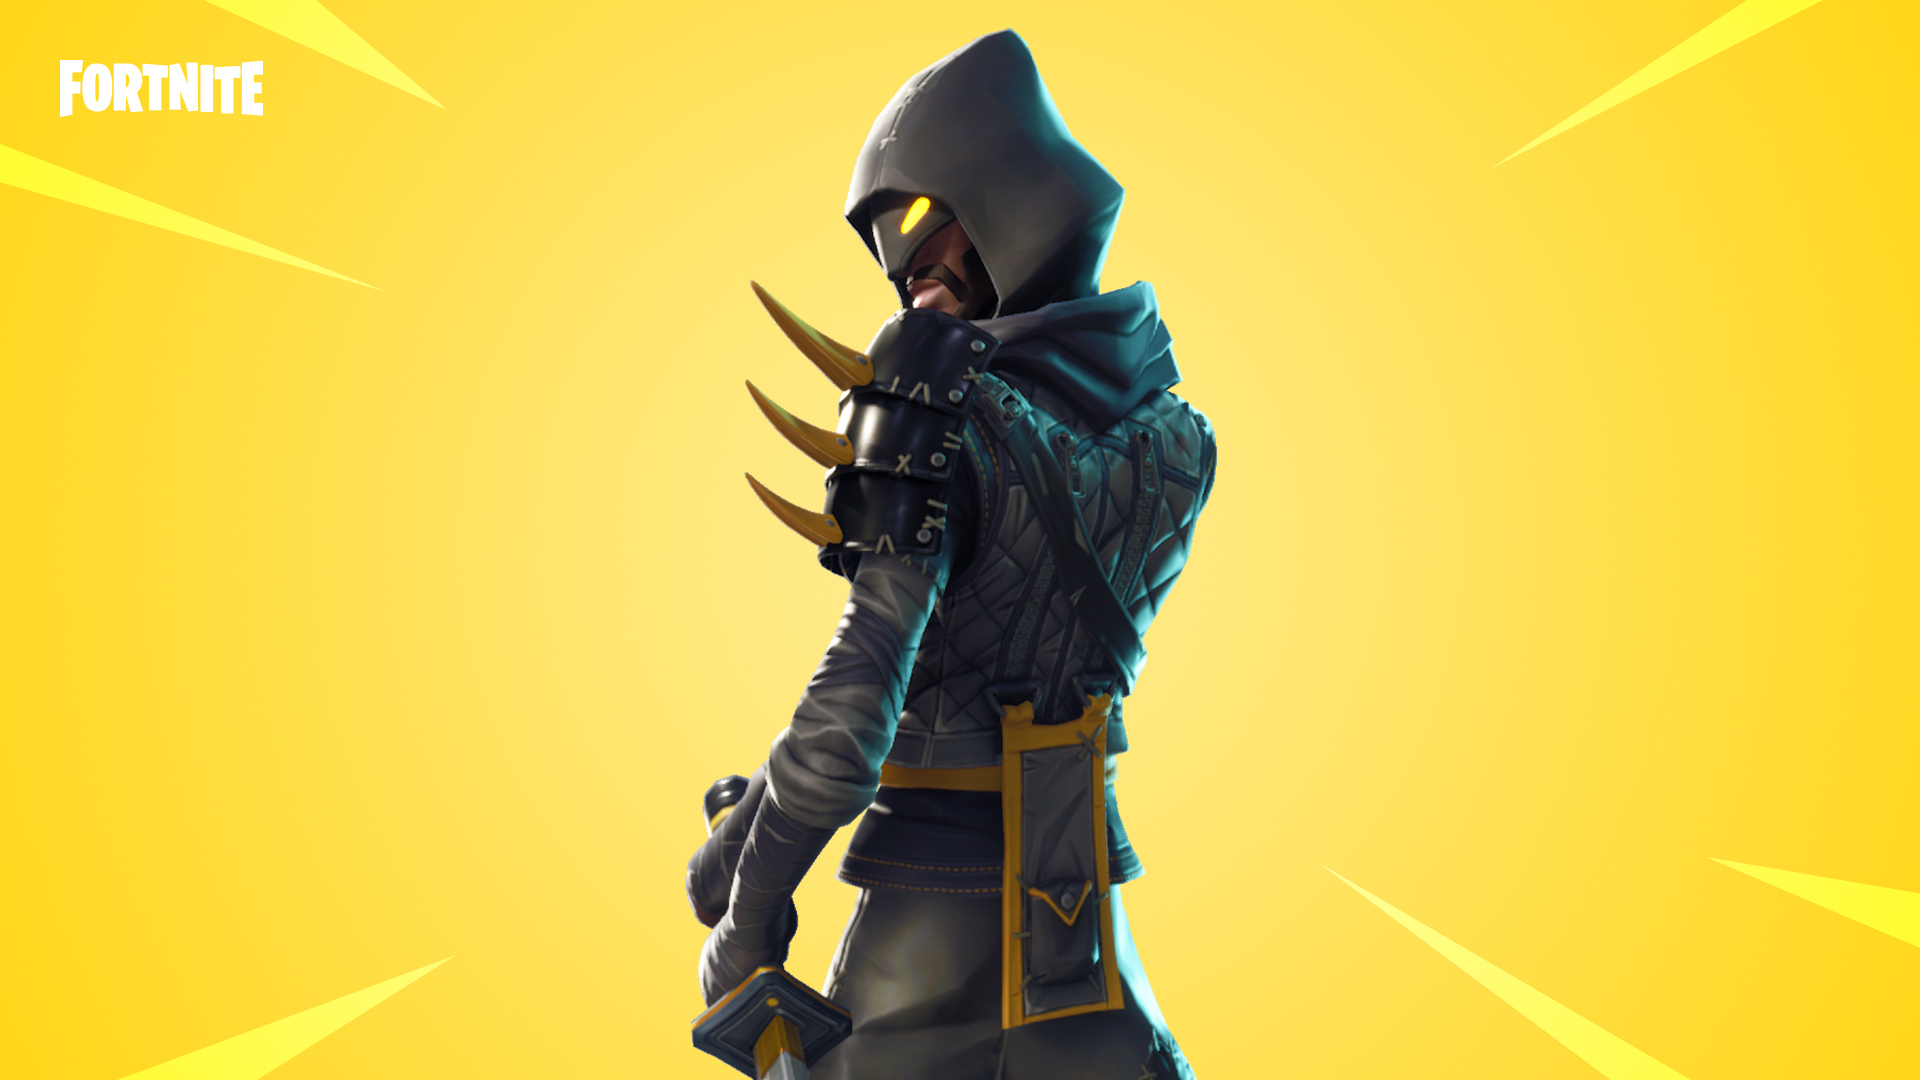 Best Fortnite Classes And Sub Classes Tiered Rankings - image via epic games